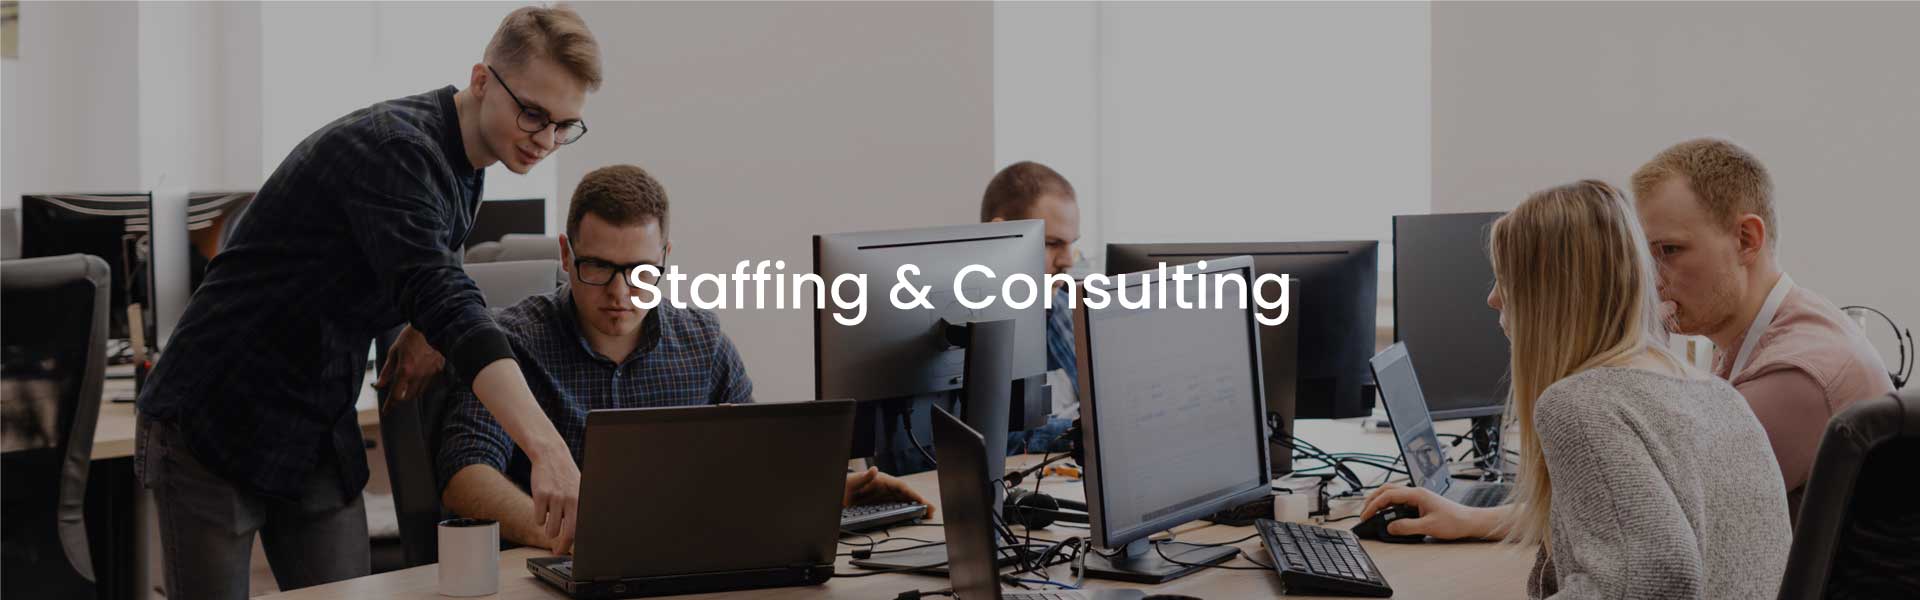 Trigyn’s Staffing & Consulting Value Proposition